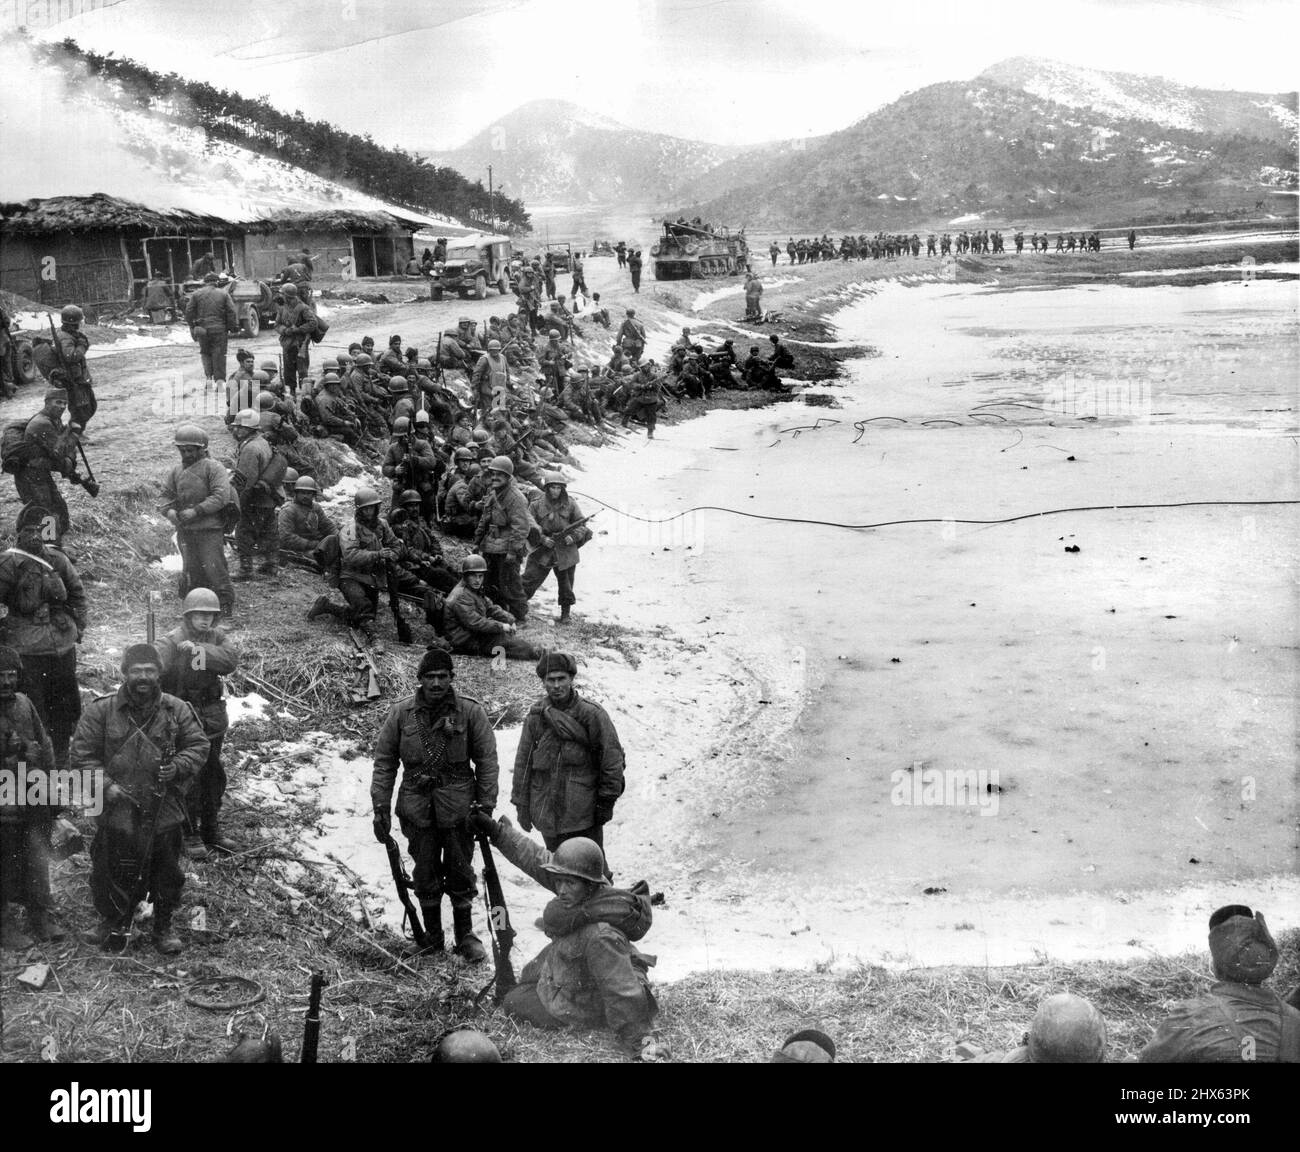 A Day With The 25th (Ninth of Ten) - Turkish troops (background) move up to the front while other turks (foreground) await their turn to relieve American 25th division troops North of Anyang. February 3, 1951. (Photo by ACME). Stock Photo